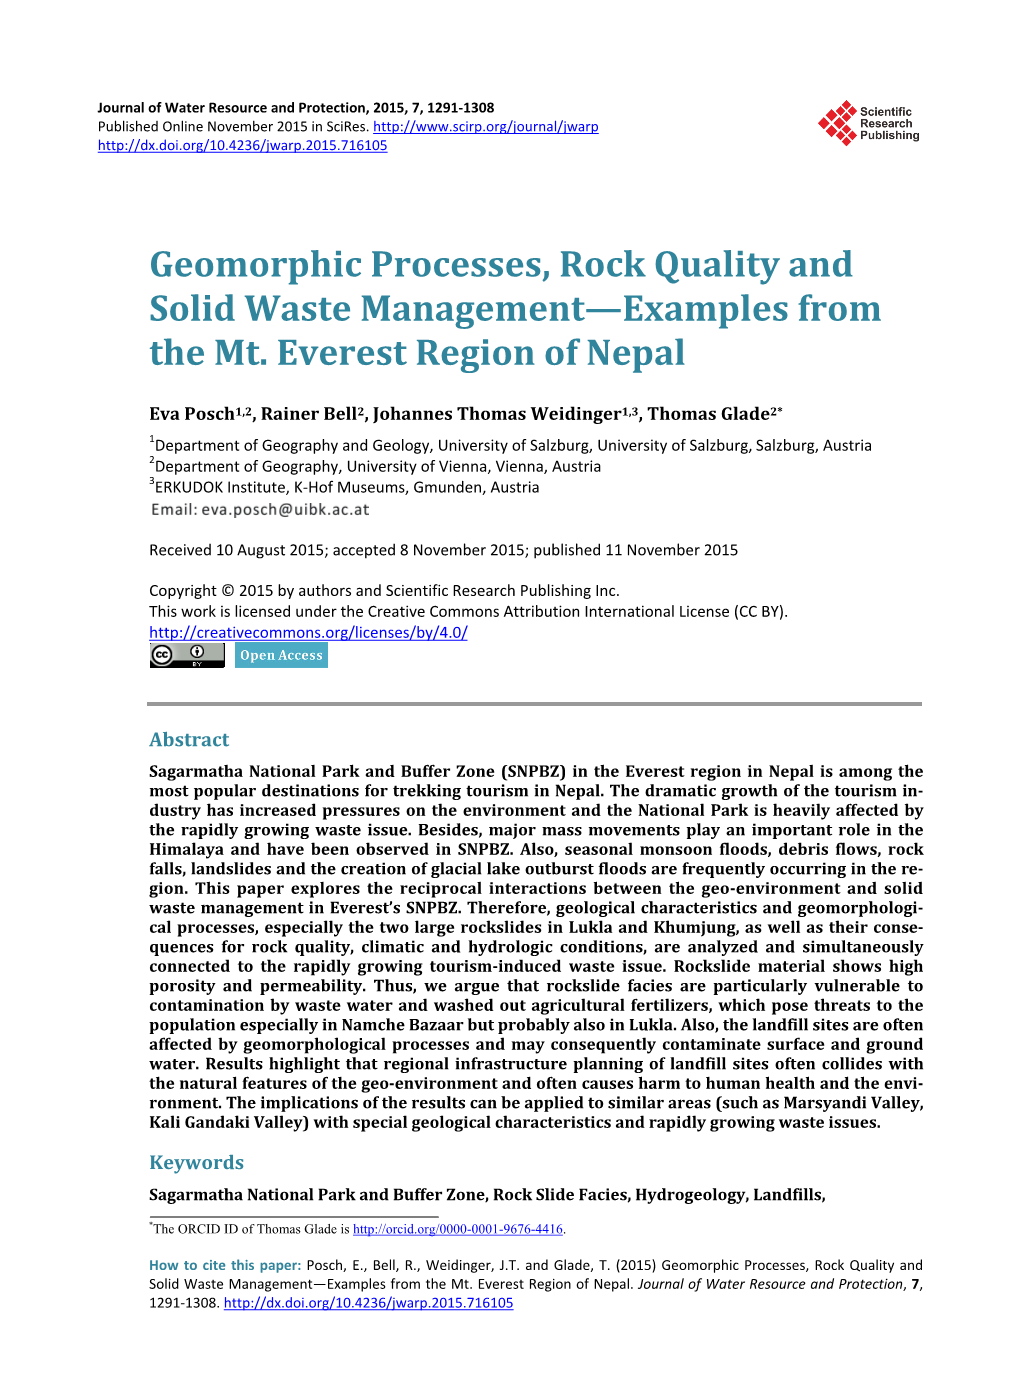 Geomorphic Processes, Rock Quality and Solid Waste Management—Examples from the Mt